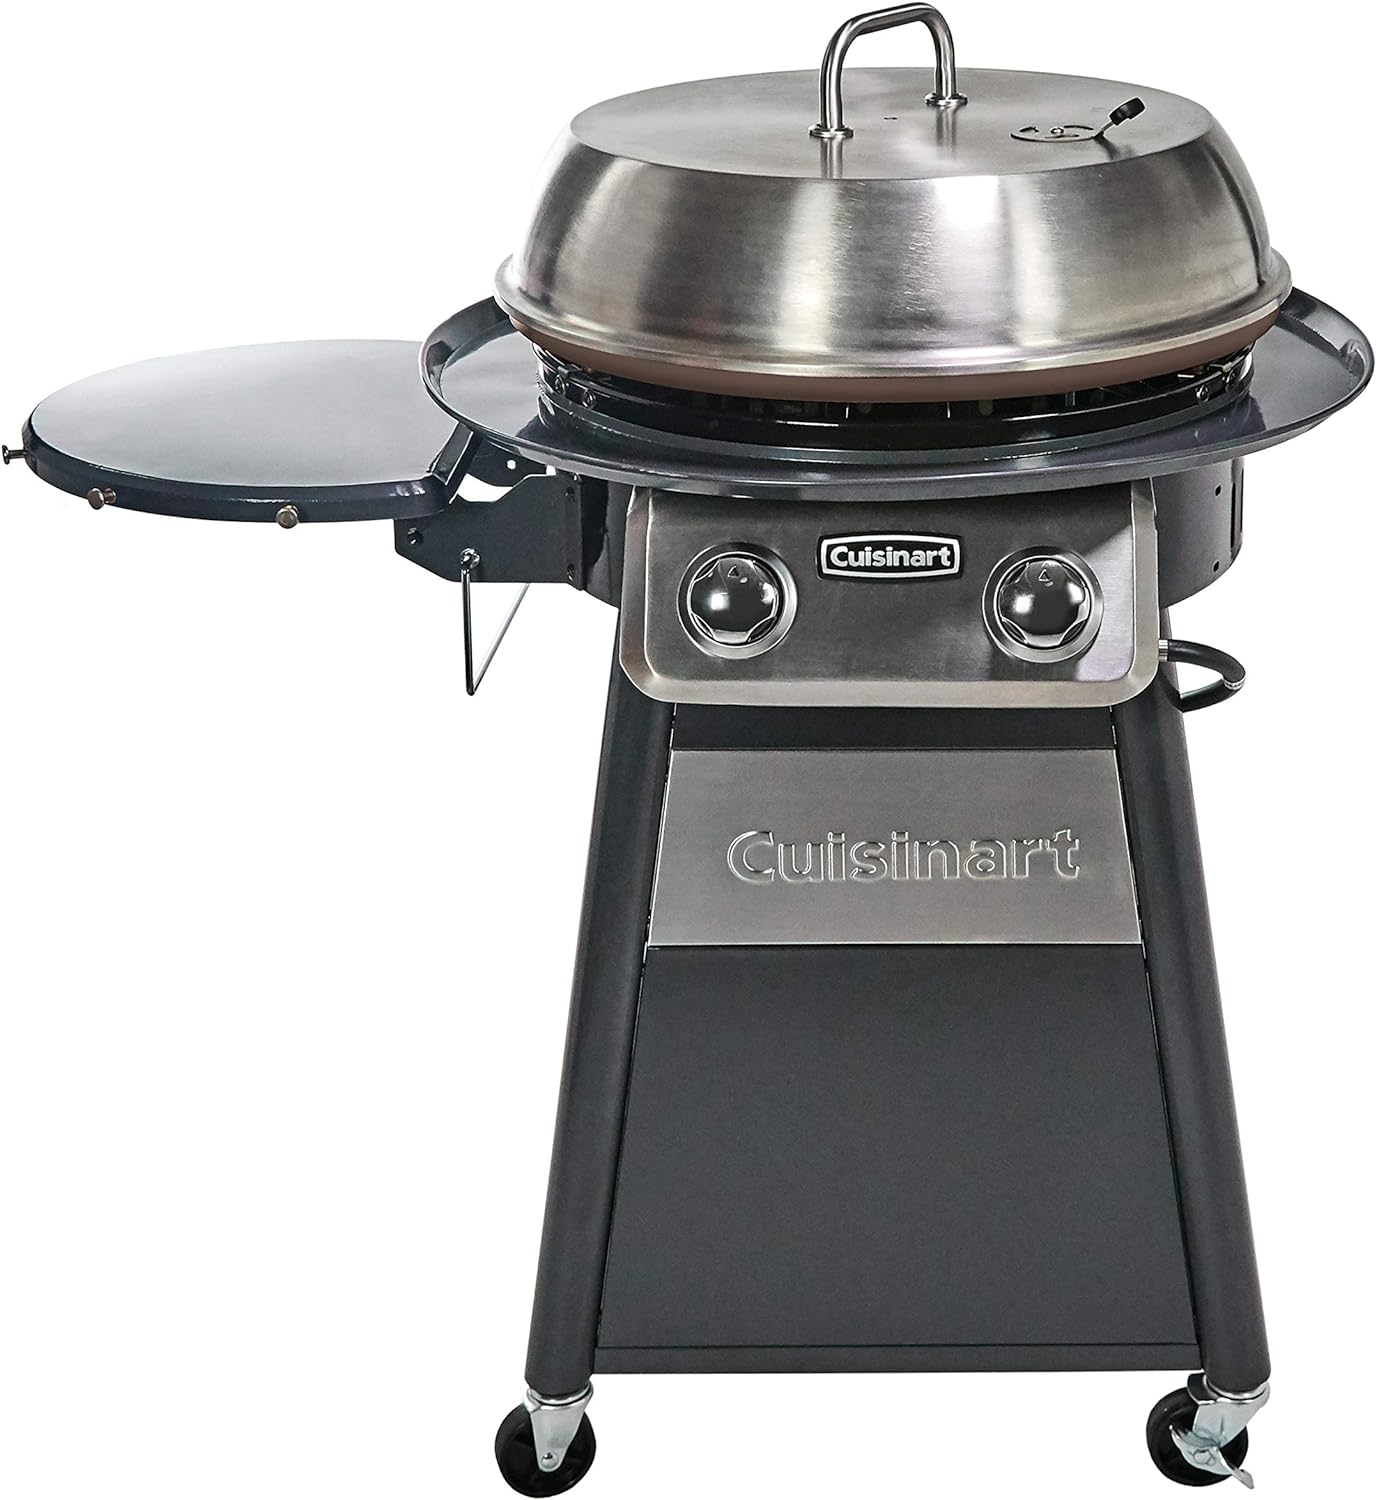 Cuisinart CGG-888 Griddle Cooking Center Review